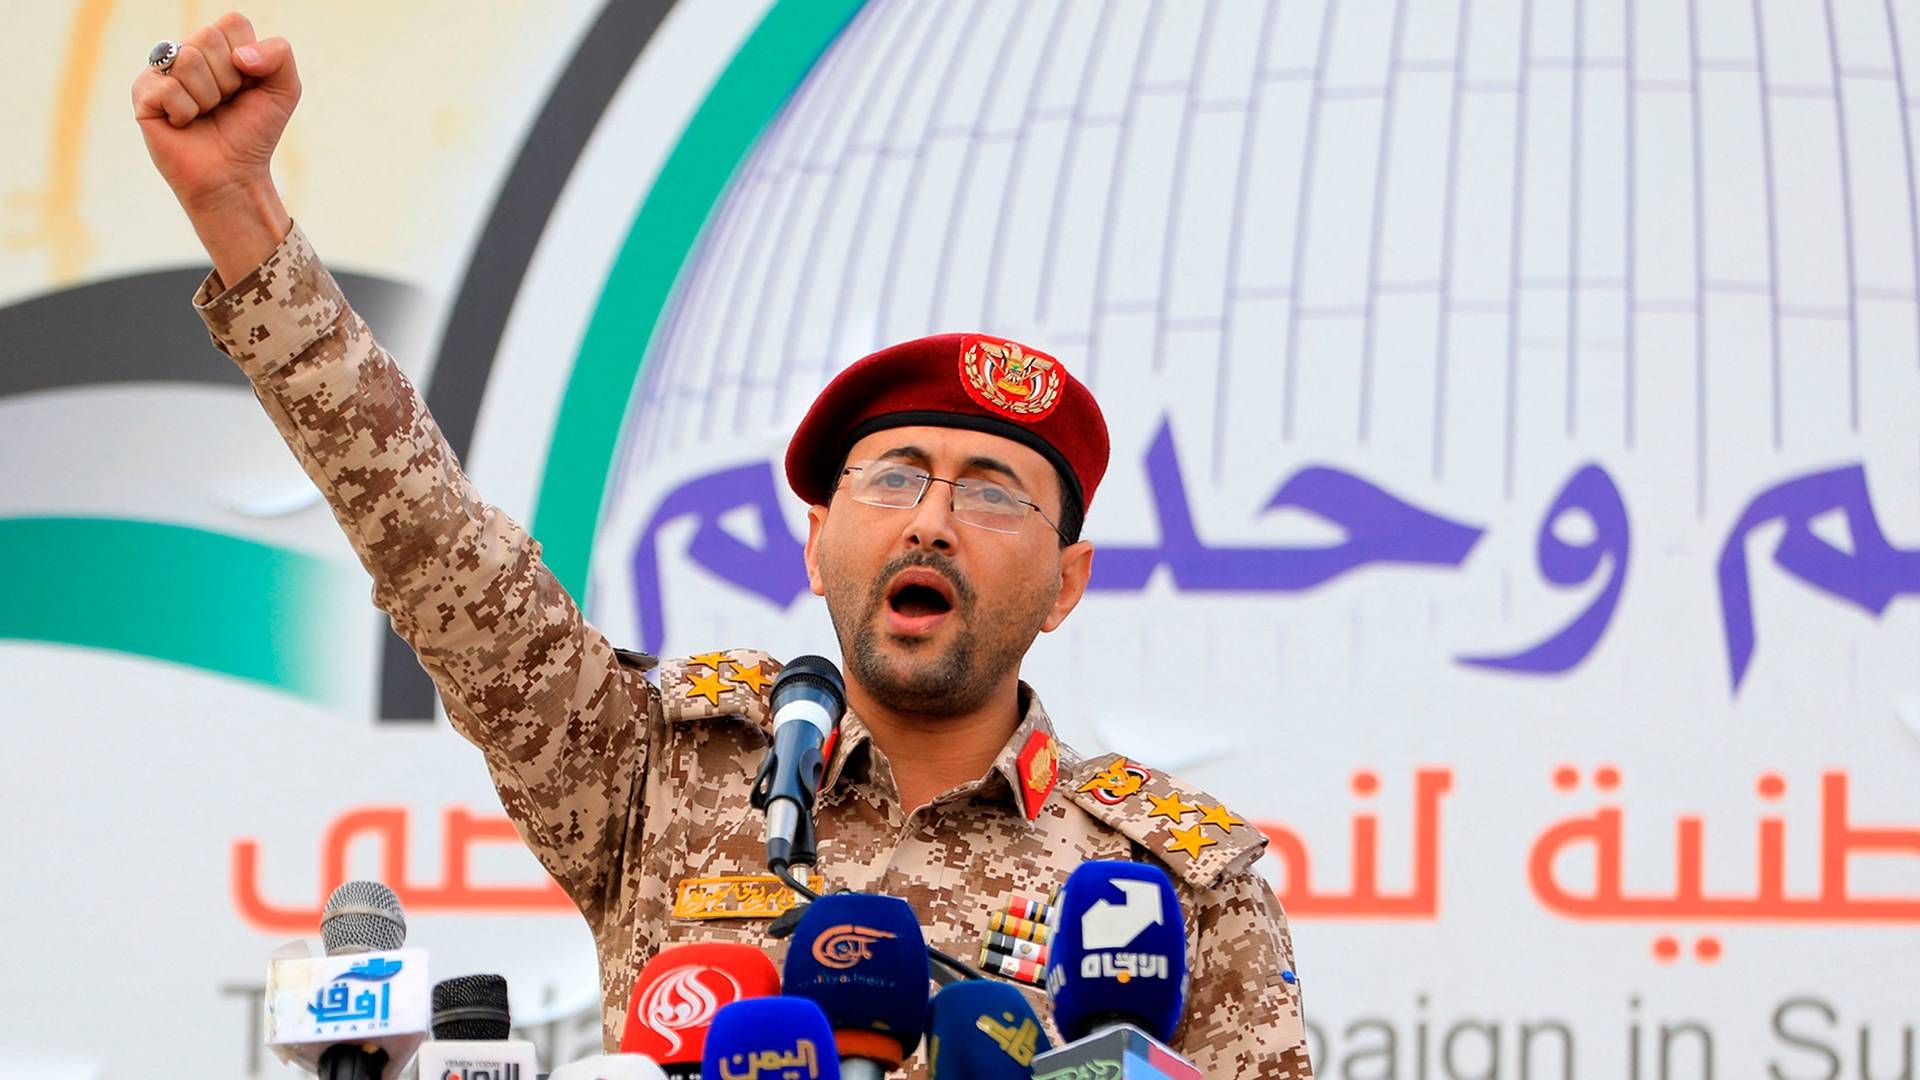 Houthi military spokesman brigadier general Yahya Saree speaks about the recent attacks on two merchant ships in the Red Sea during a march in solidarity with the people of Gaza in the Yemeni capital Sanaa on Dec. 15, 2023. | Photo: Mohammed Huwais/AFP/Ritzau Scanpix